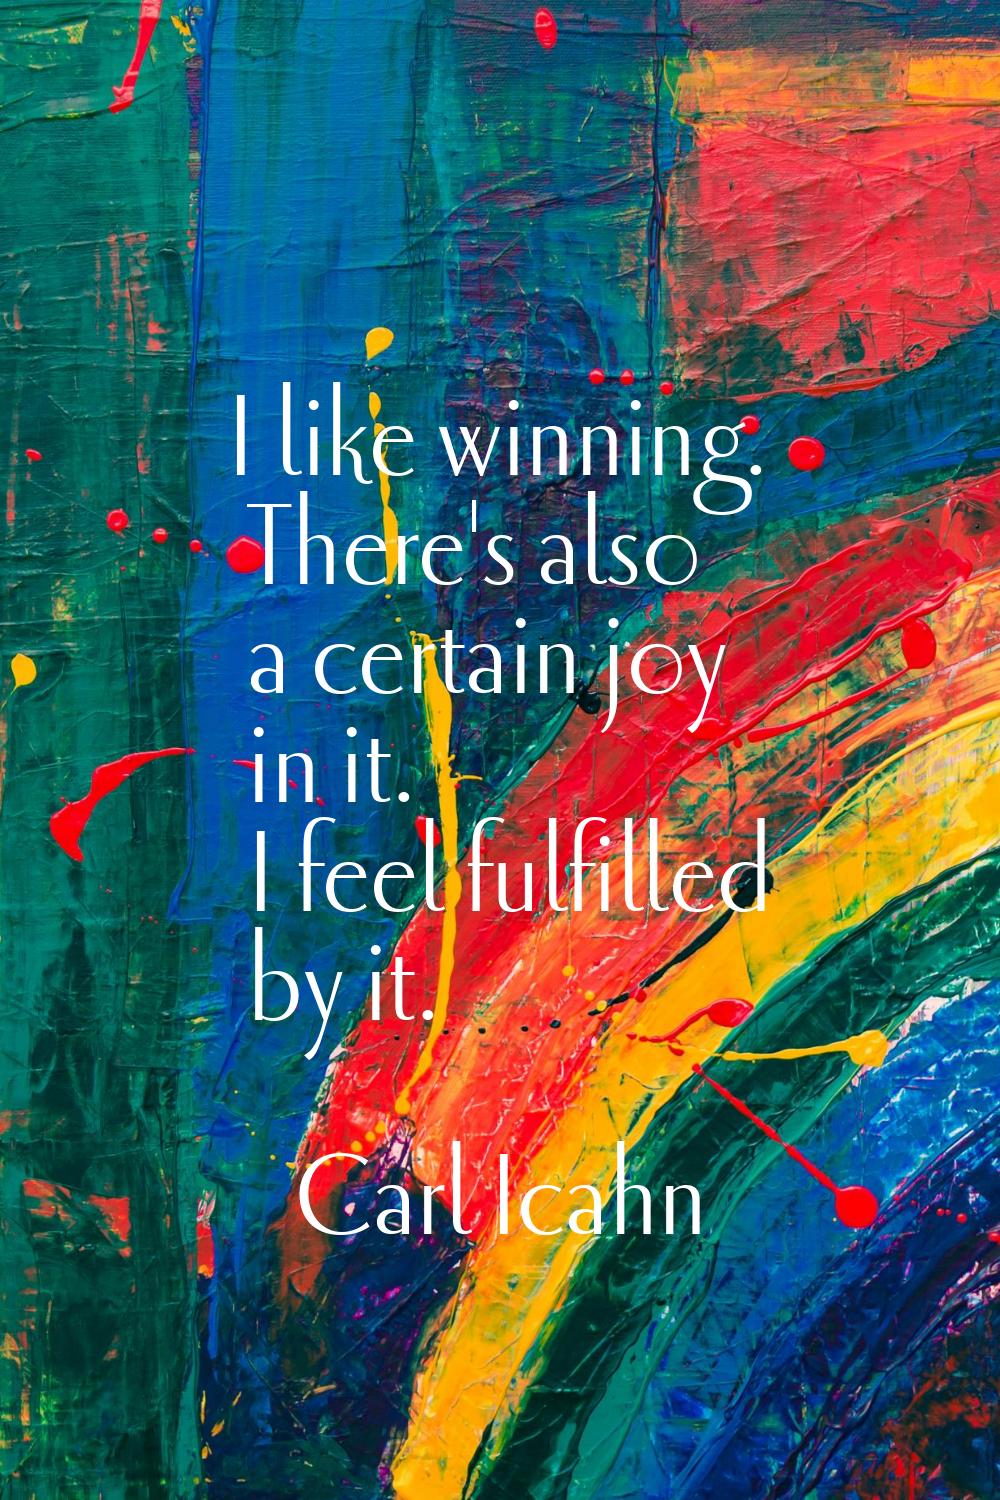 I like winning. There's also a certain joy in it. I feel fulfilled by it.